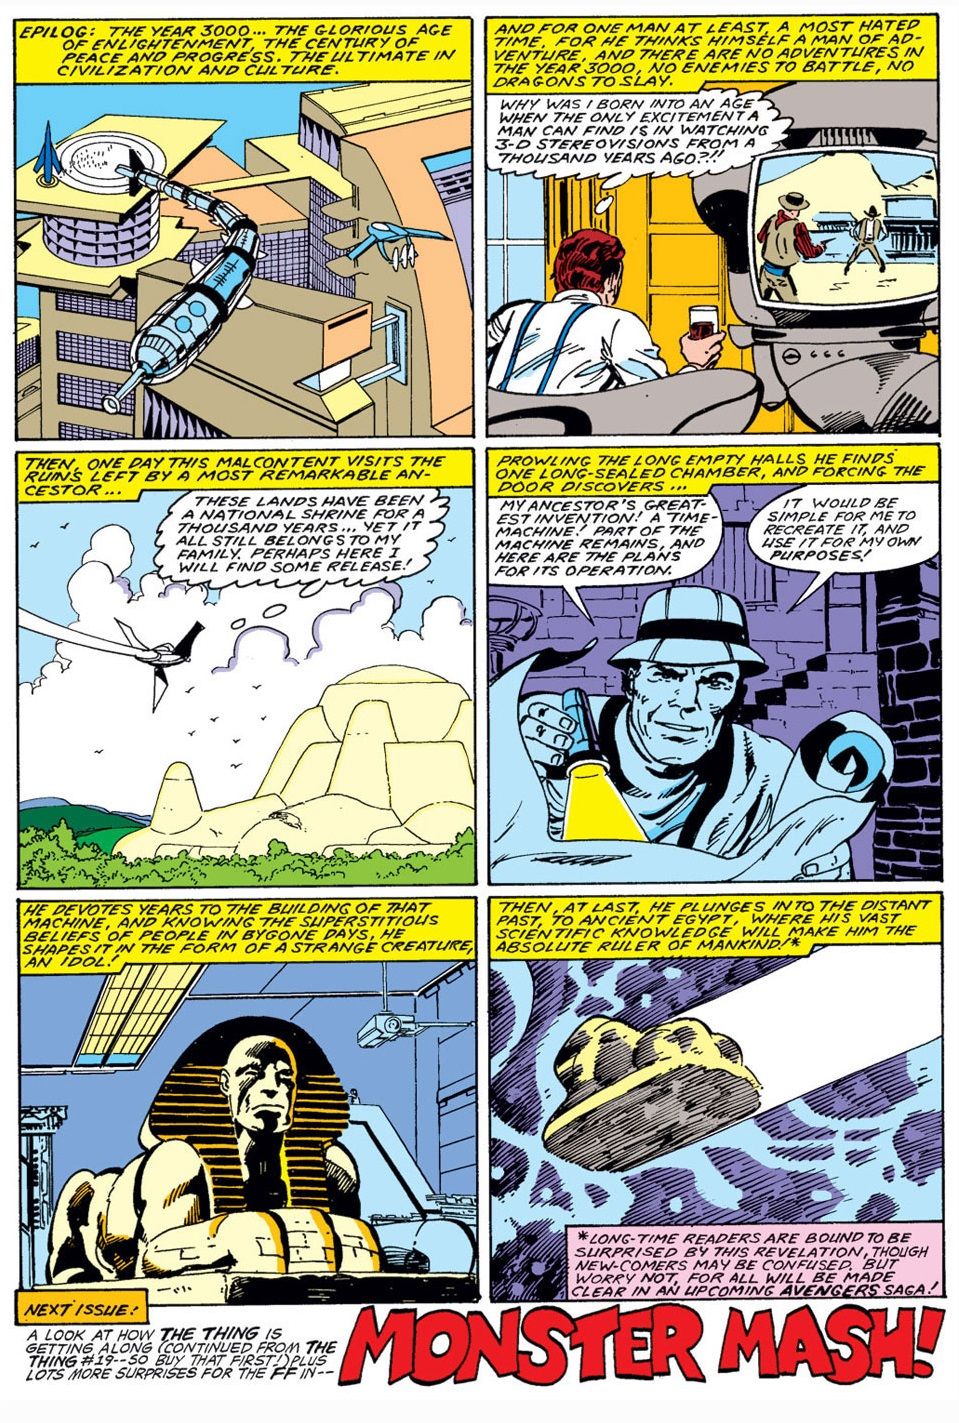 A page detailing Nathaniel Richards' origin story shows him making a time machine